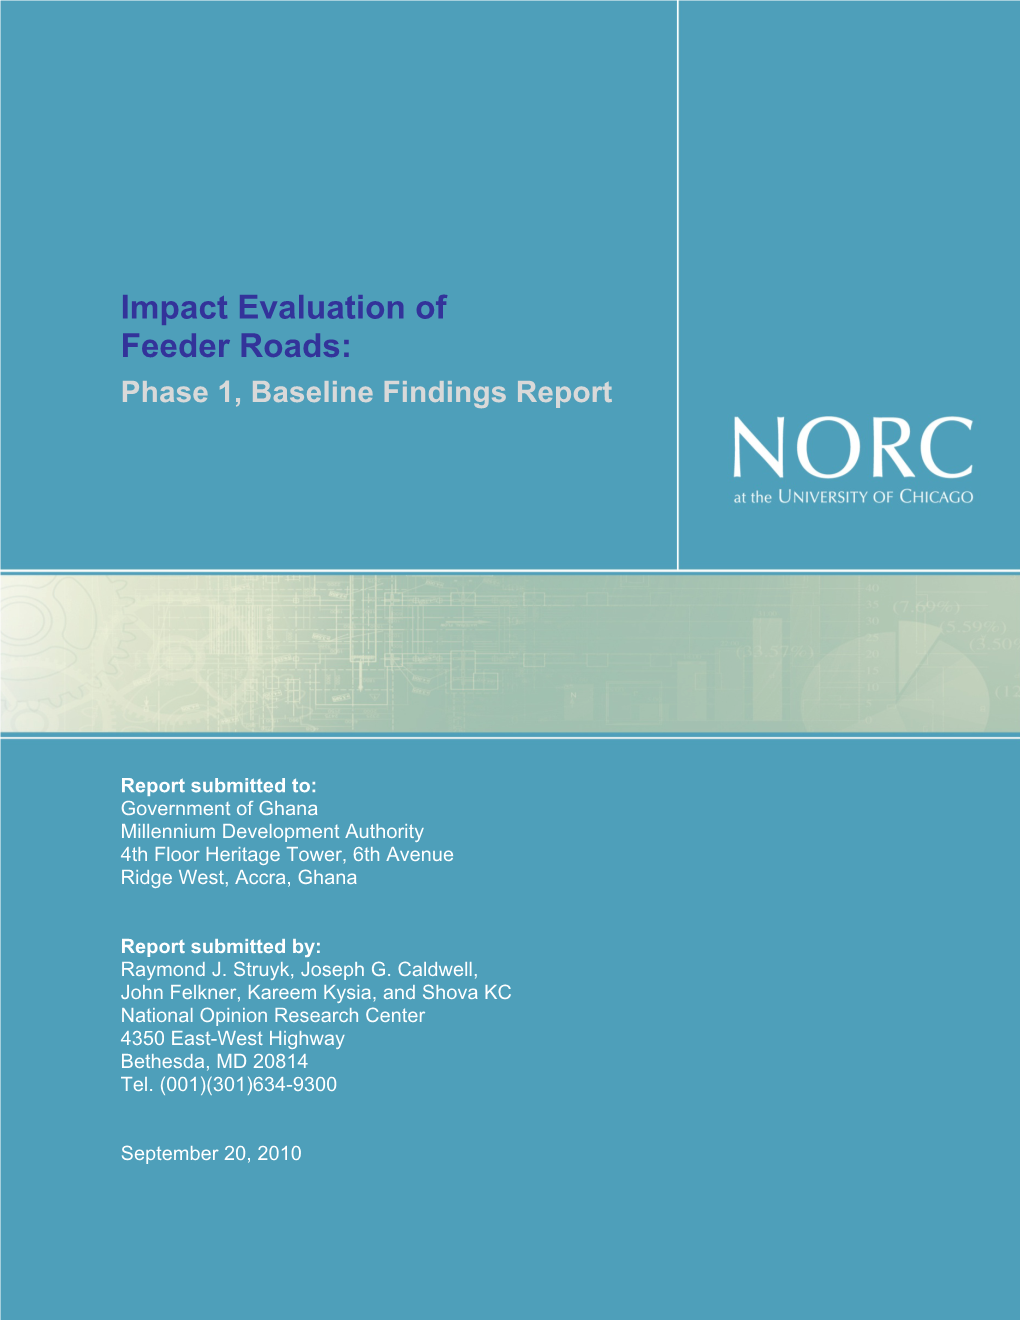 Impact Evaluation of Feeder Roads: Phase 1, Baseline Findings Report